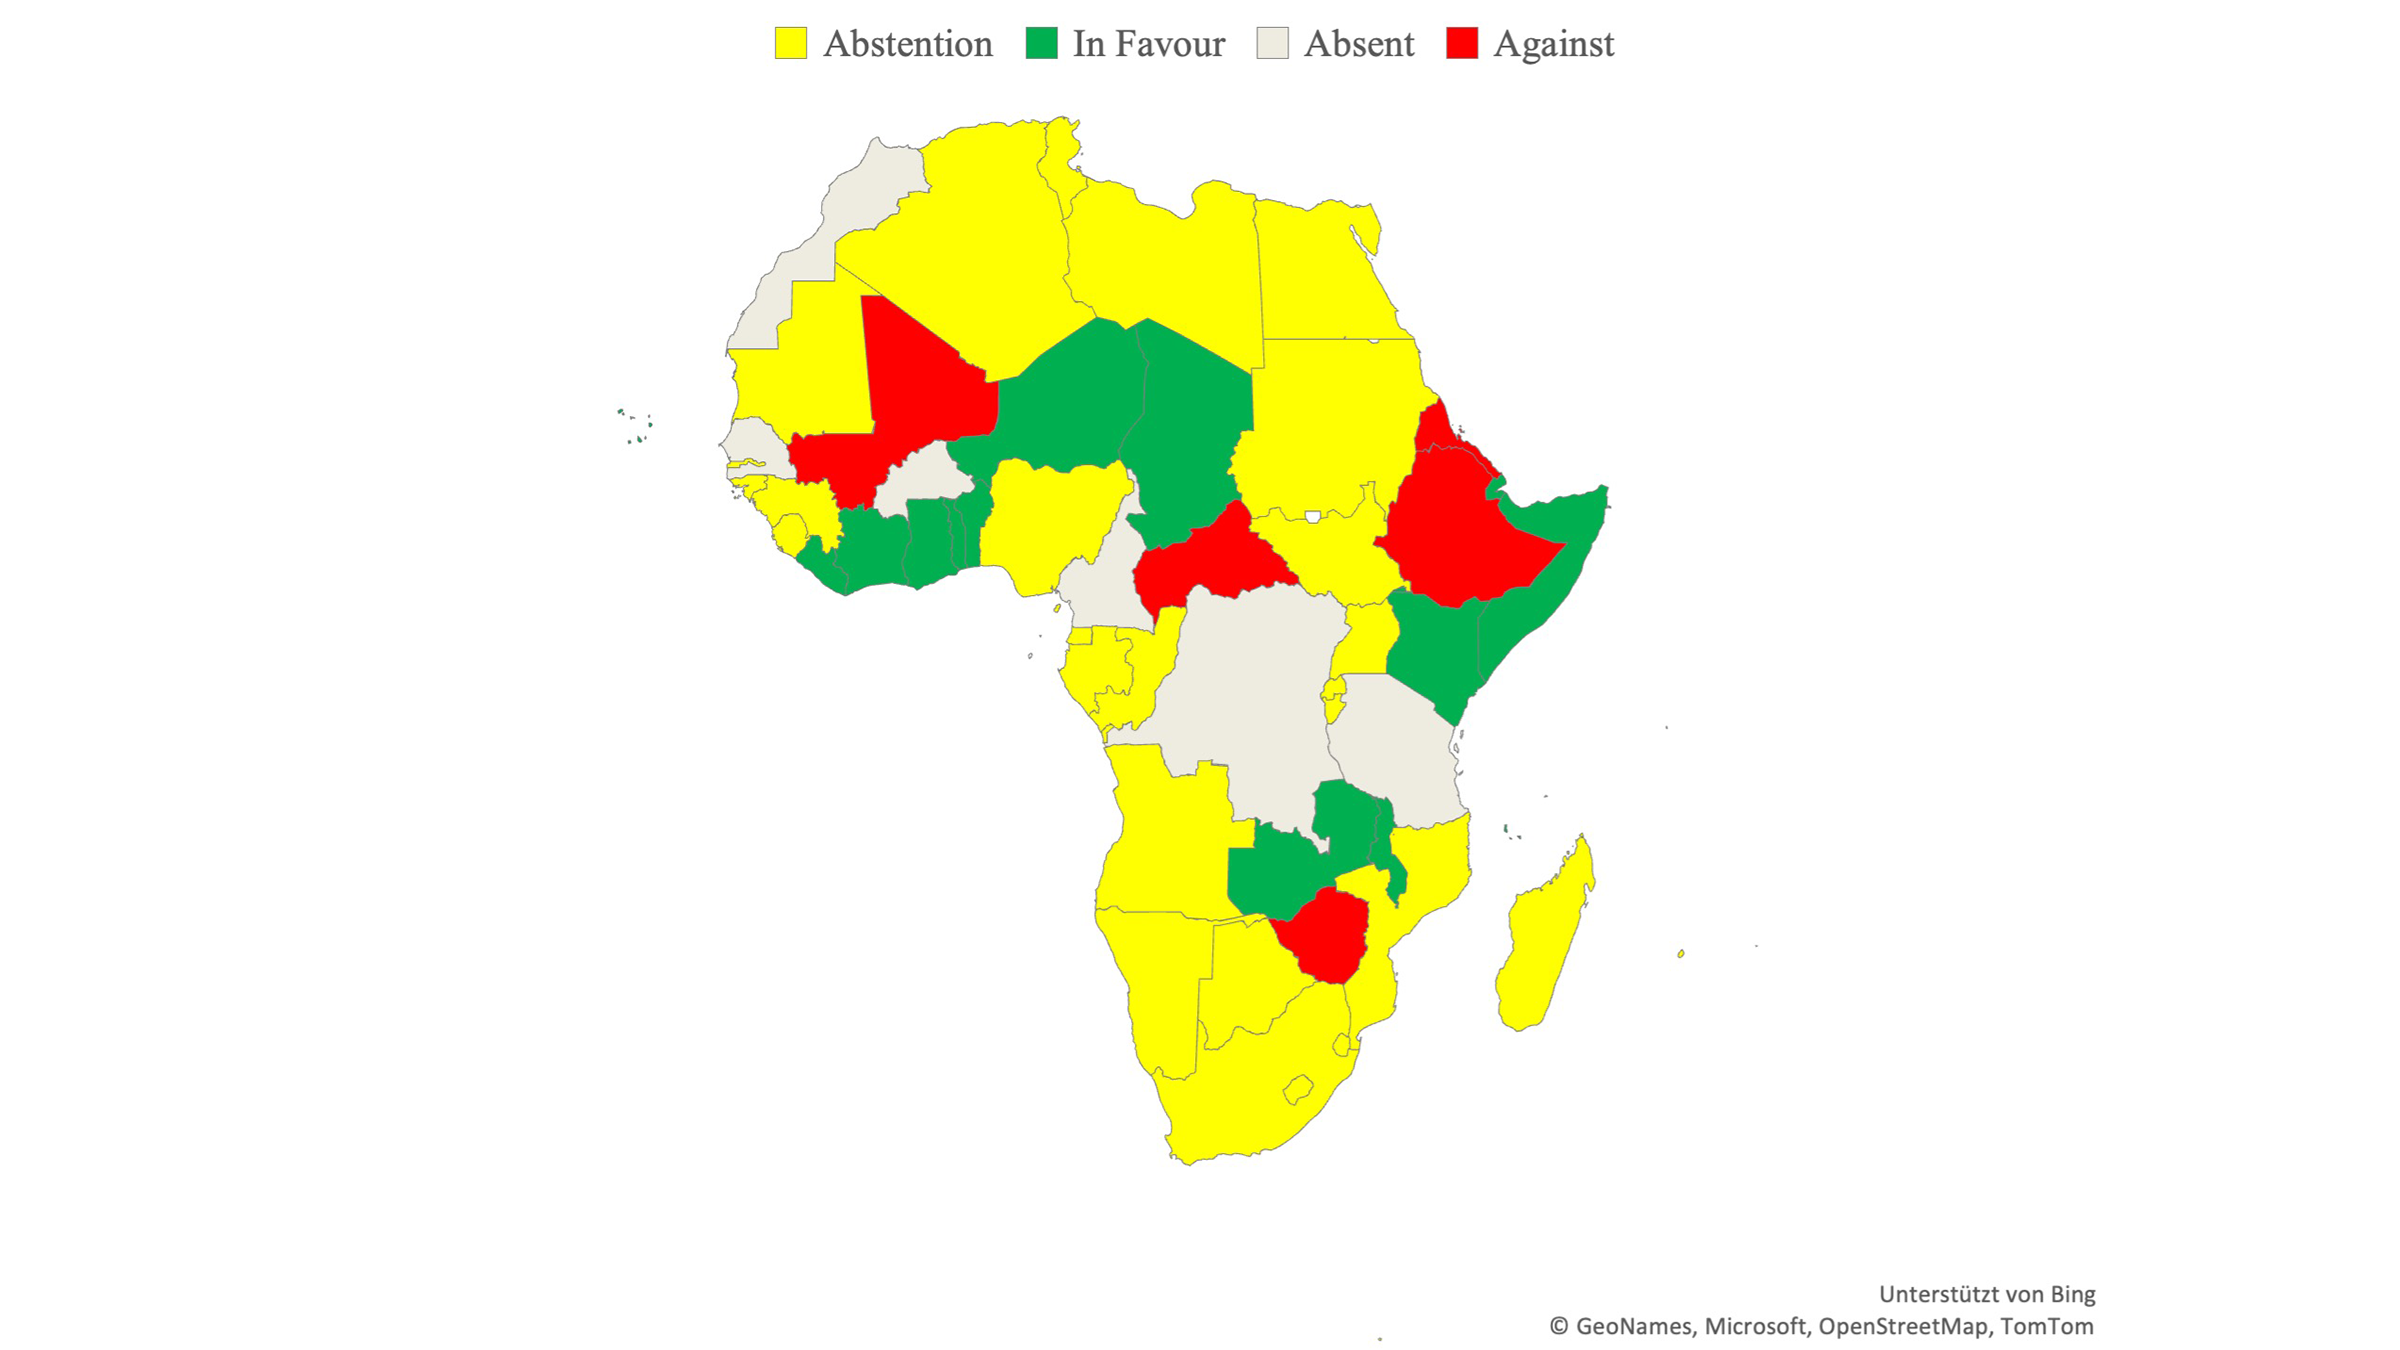 Map showing African States’ Votes on UN Resolution ES-11/6 (“Furtherance of Remedy and Reparation for Aggression against Ukraine”), November 2022.